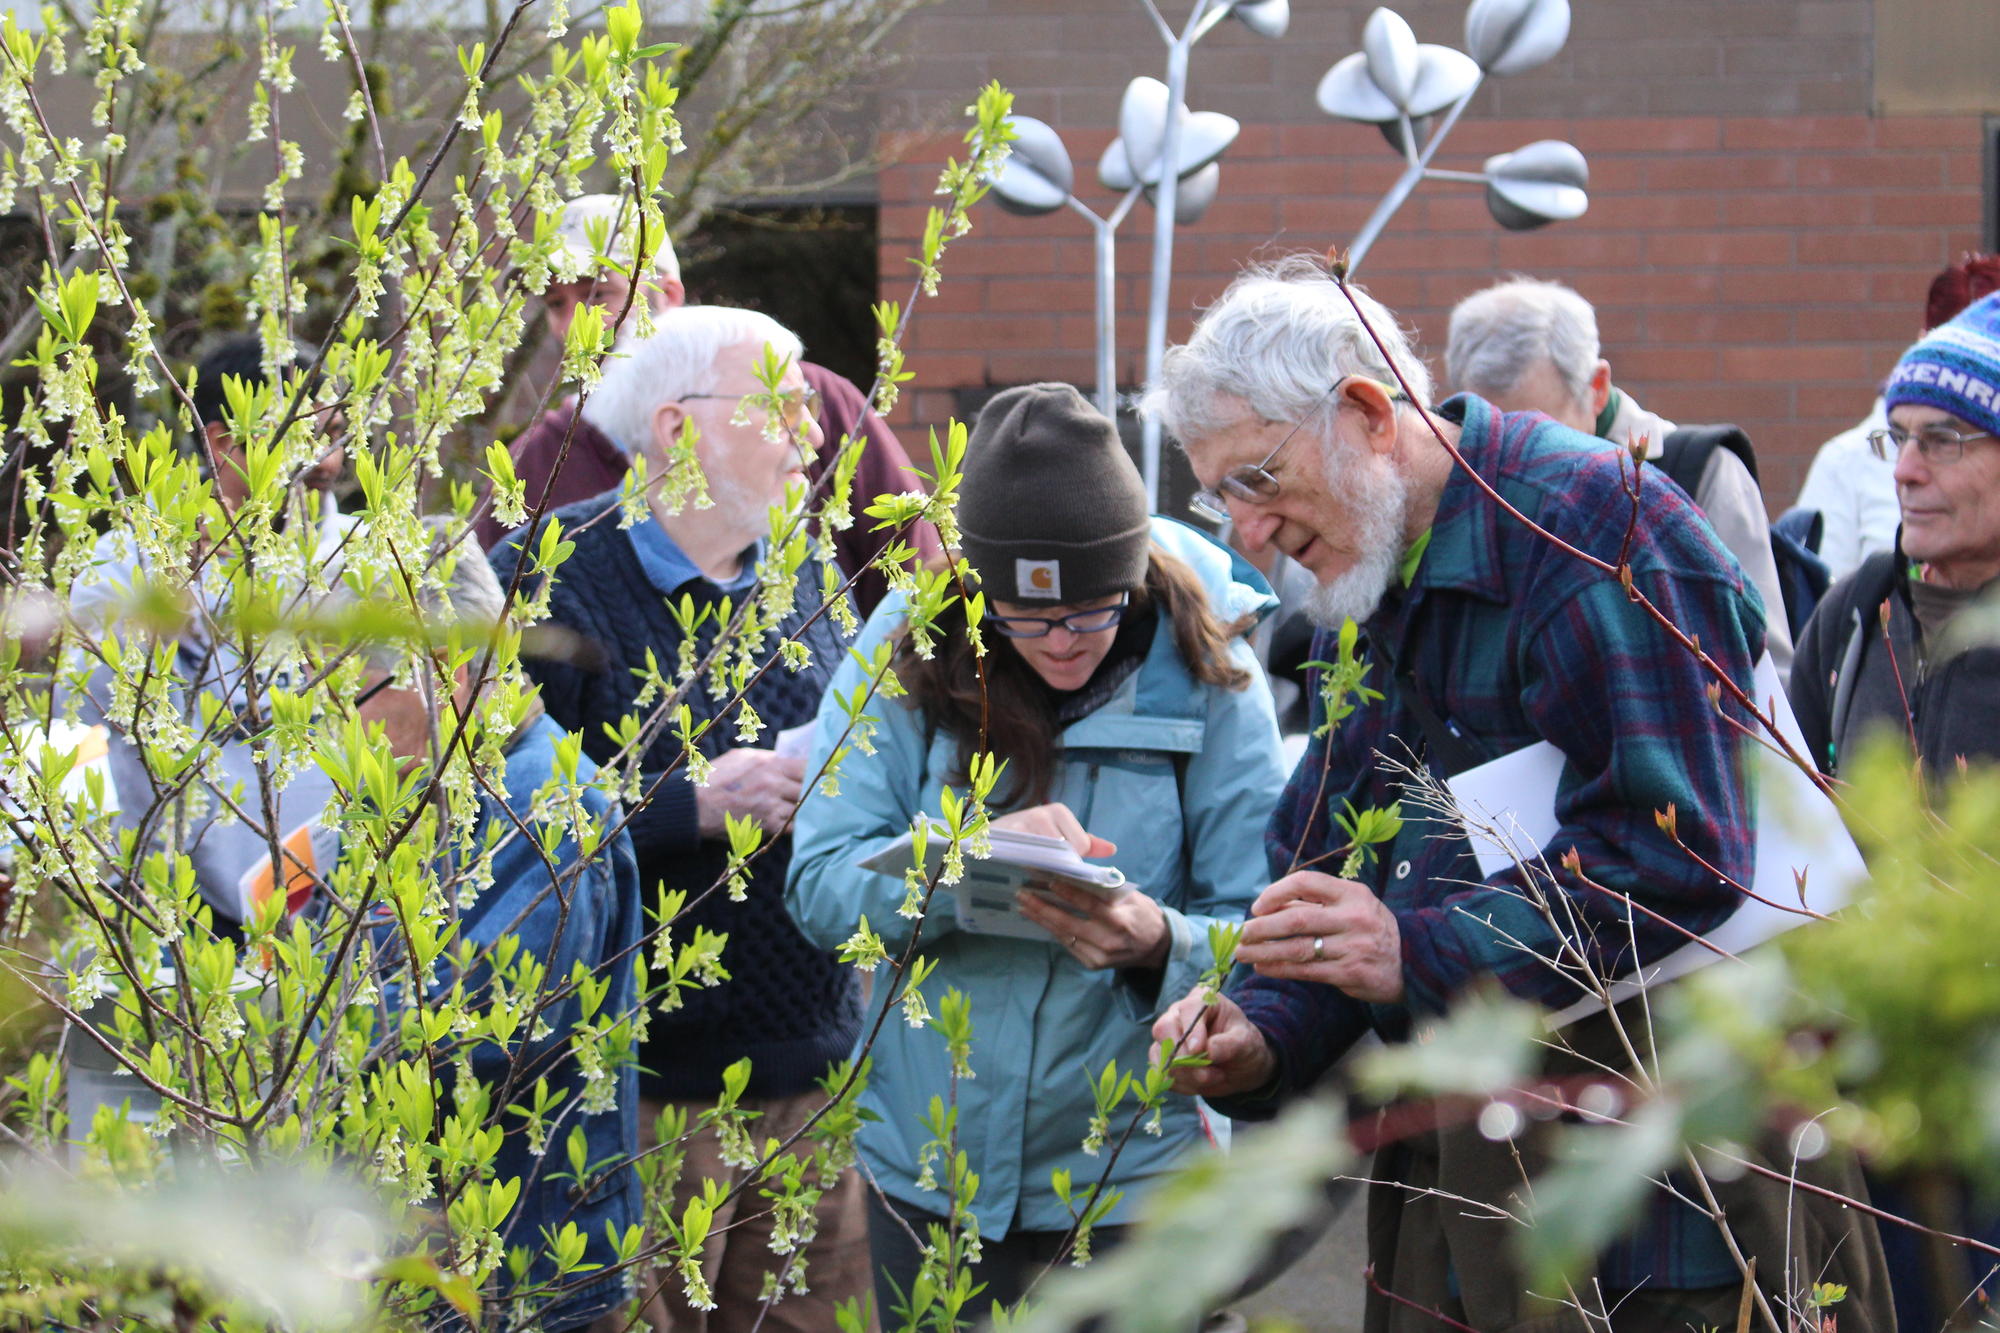 Tree and shrub identification is a core class offered at Tree Schools.